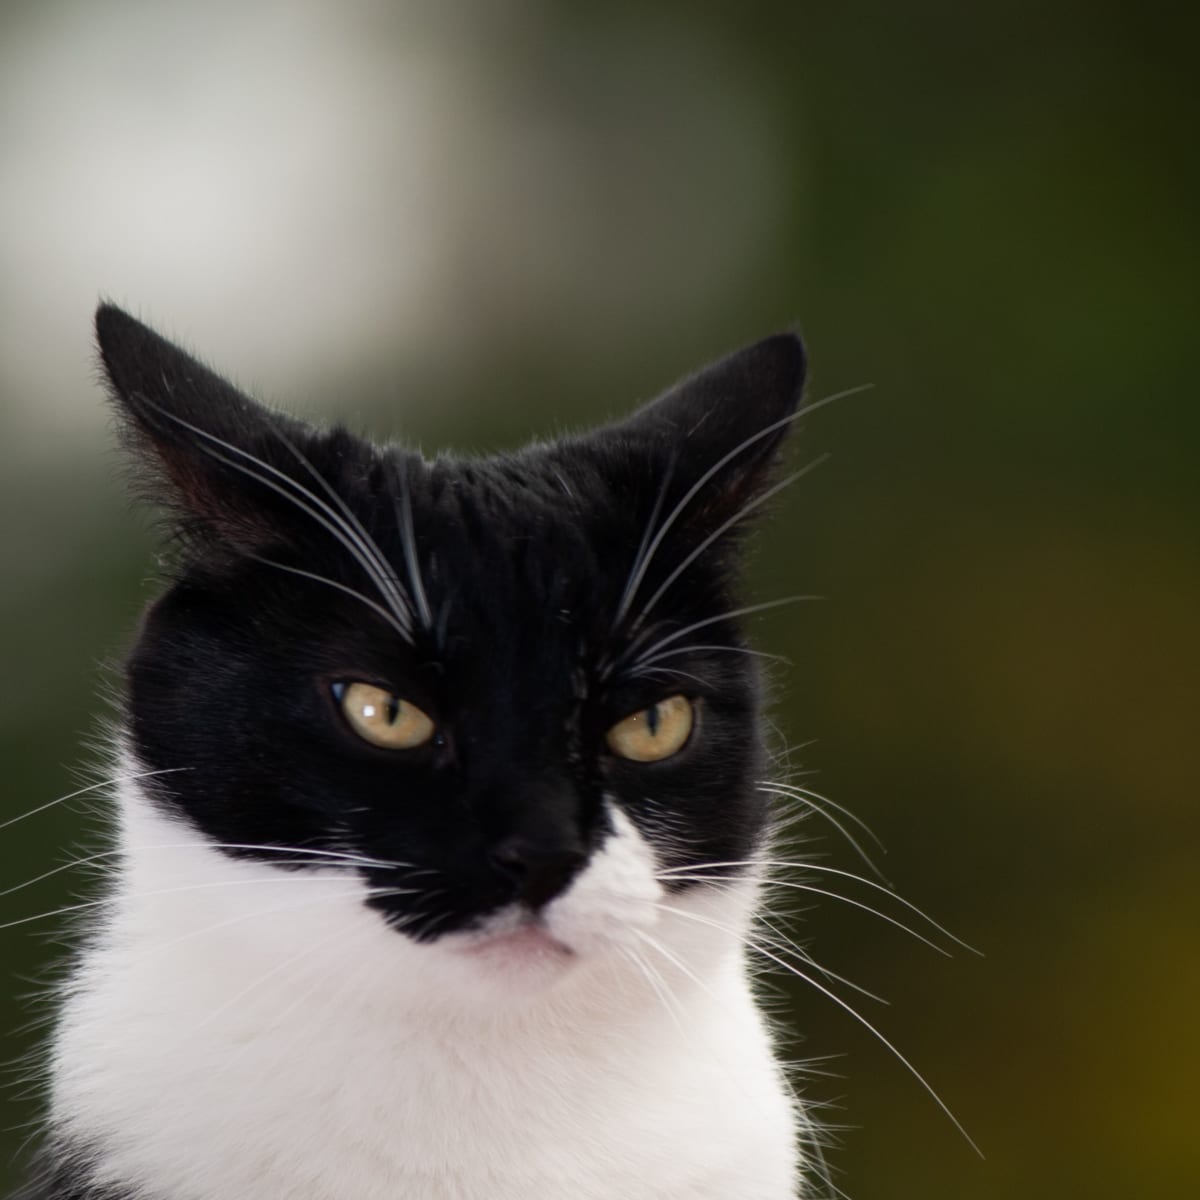 19 Pissed Off Cats That Are Way Too Cute To Be Angry - I Can Has